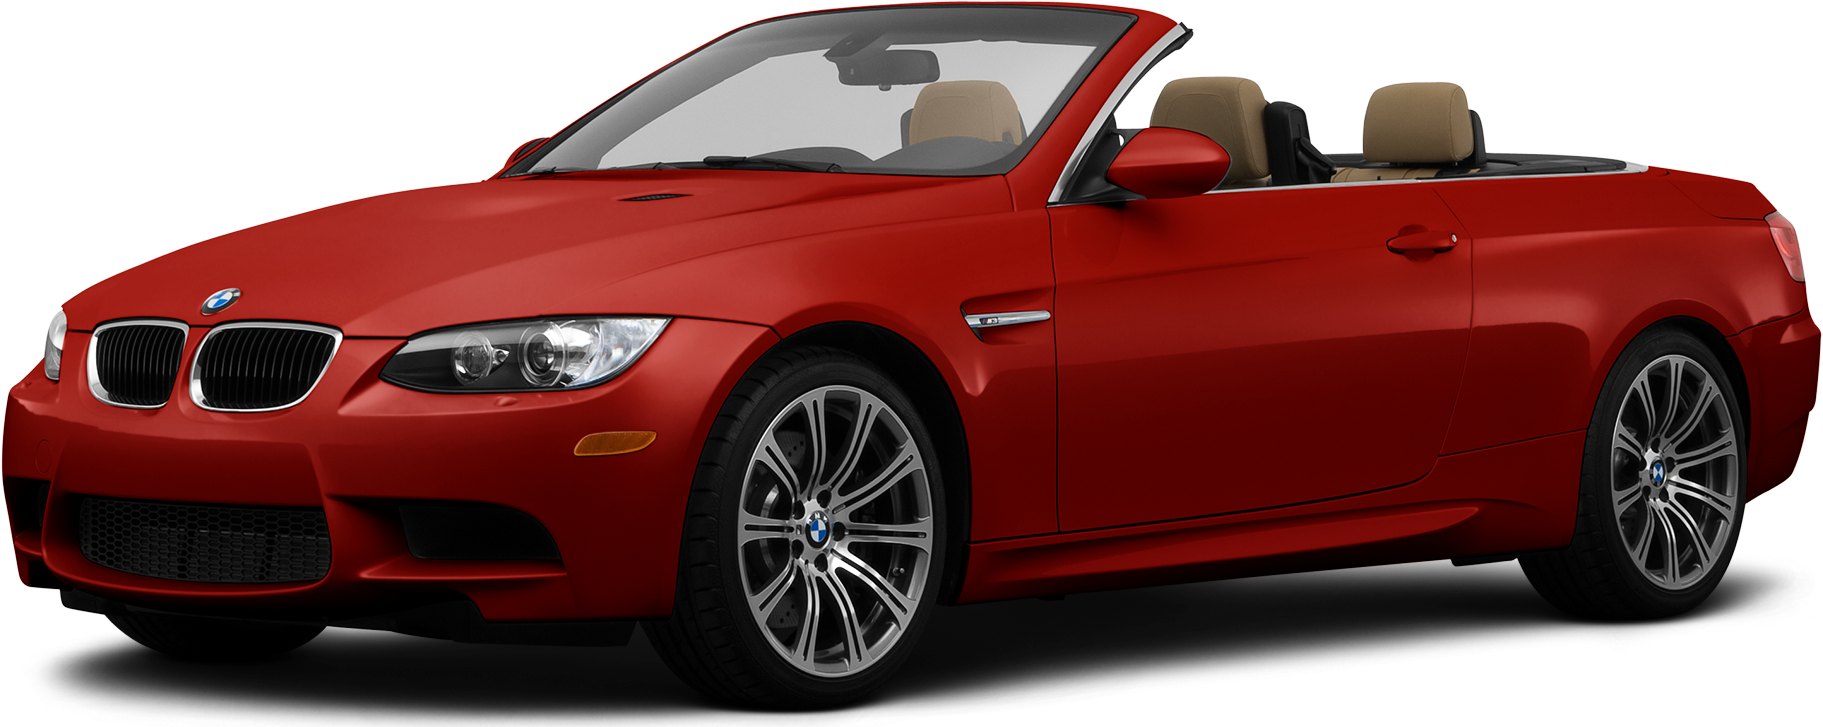 2013 BMW M3 Price, Value, Ratings & Reviews